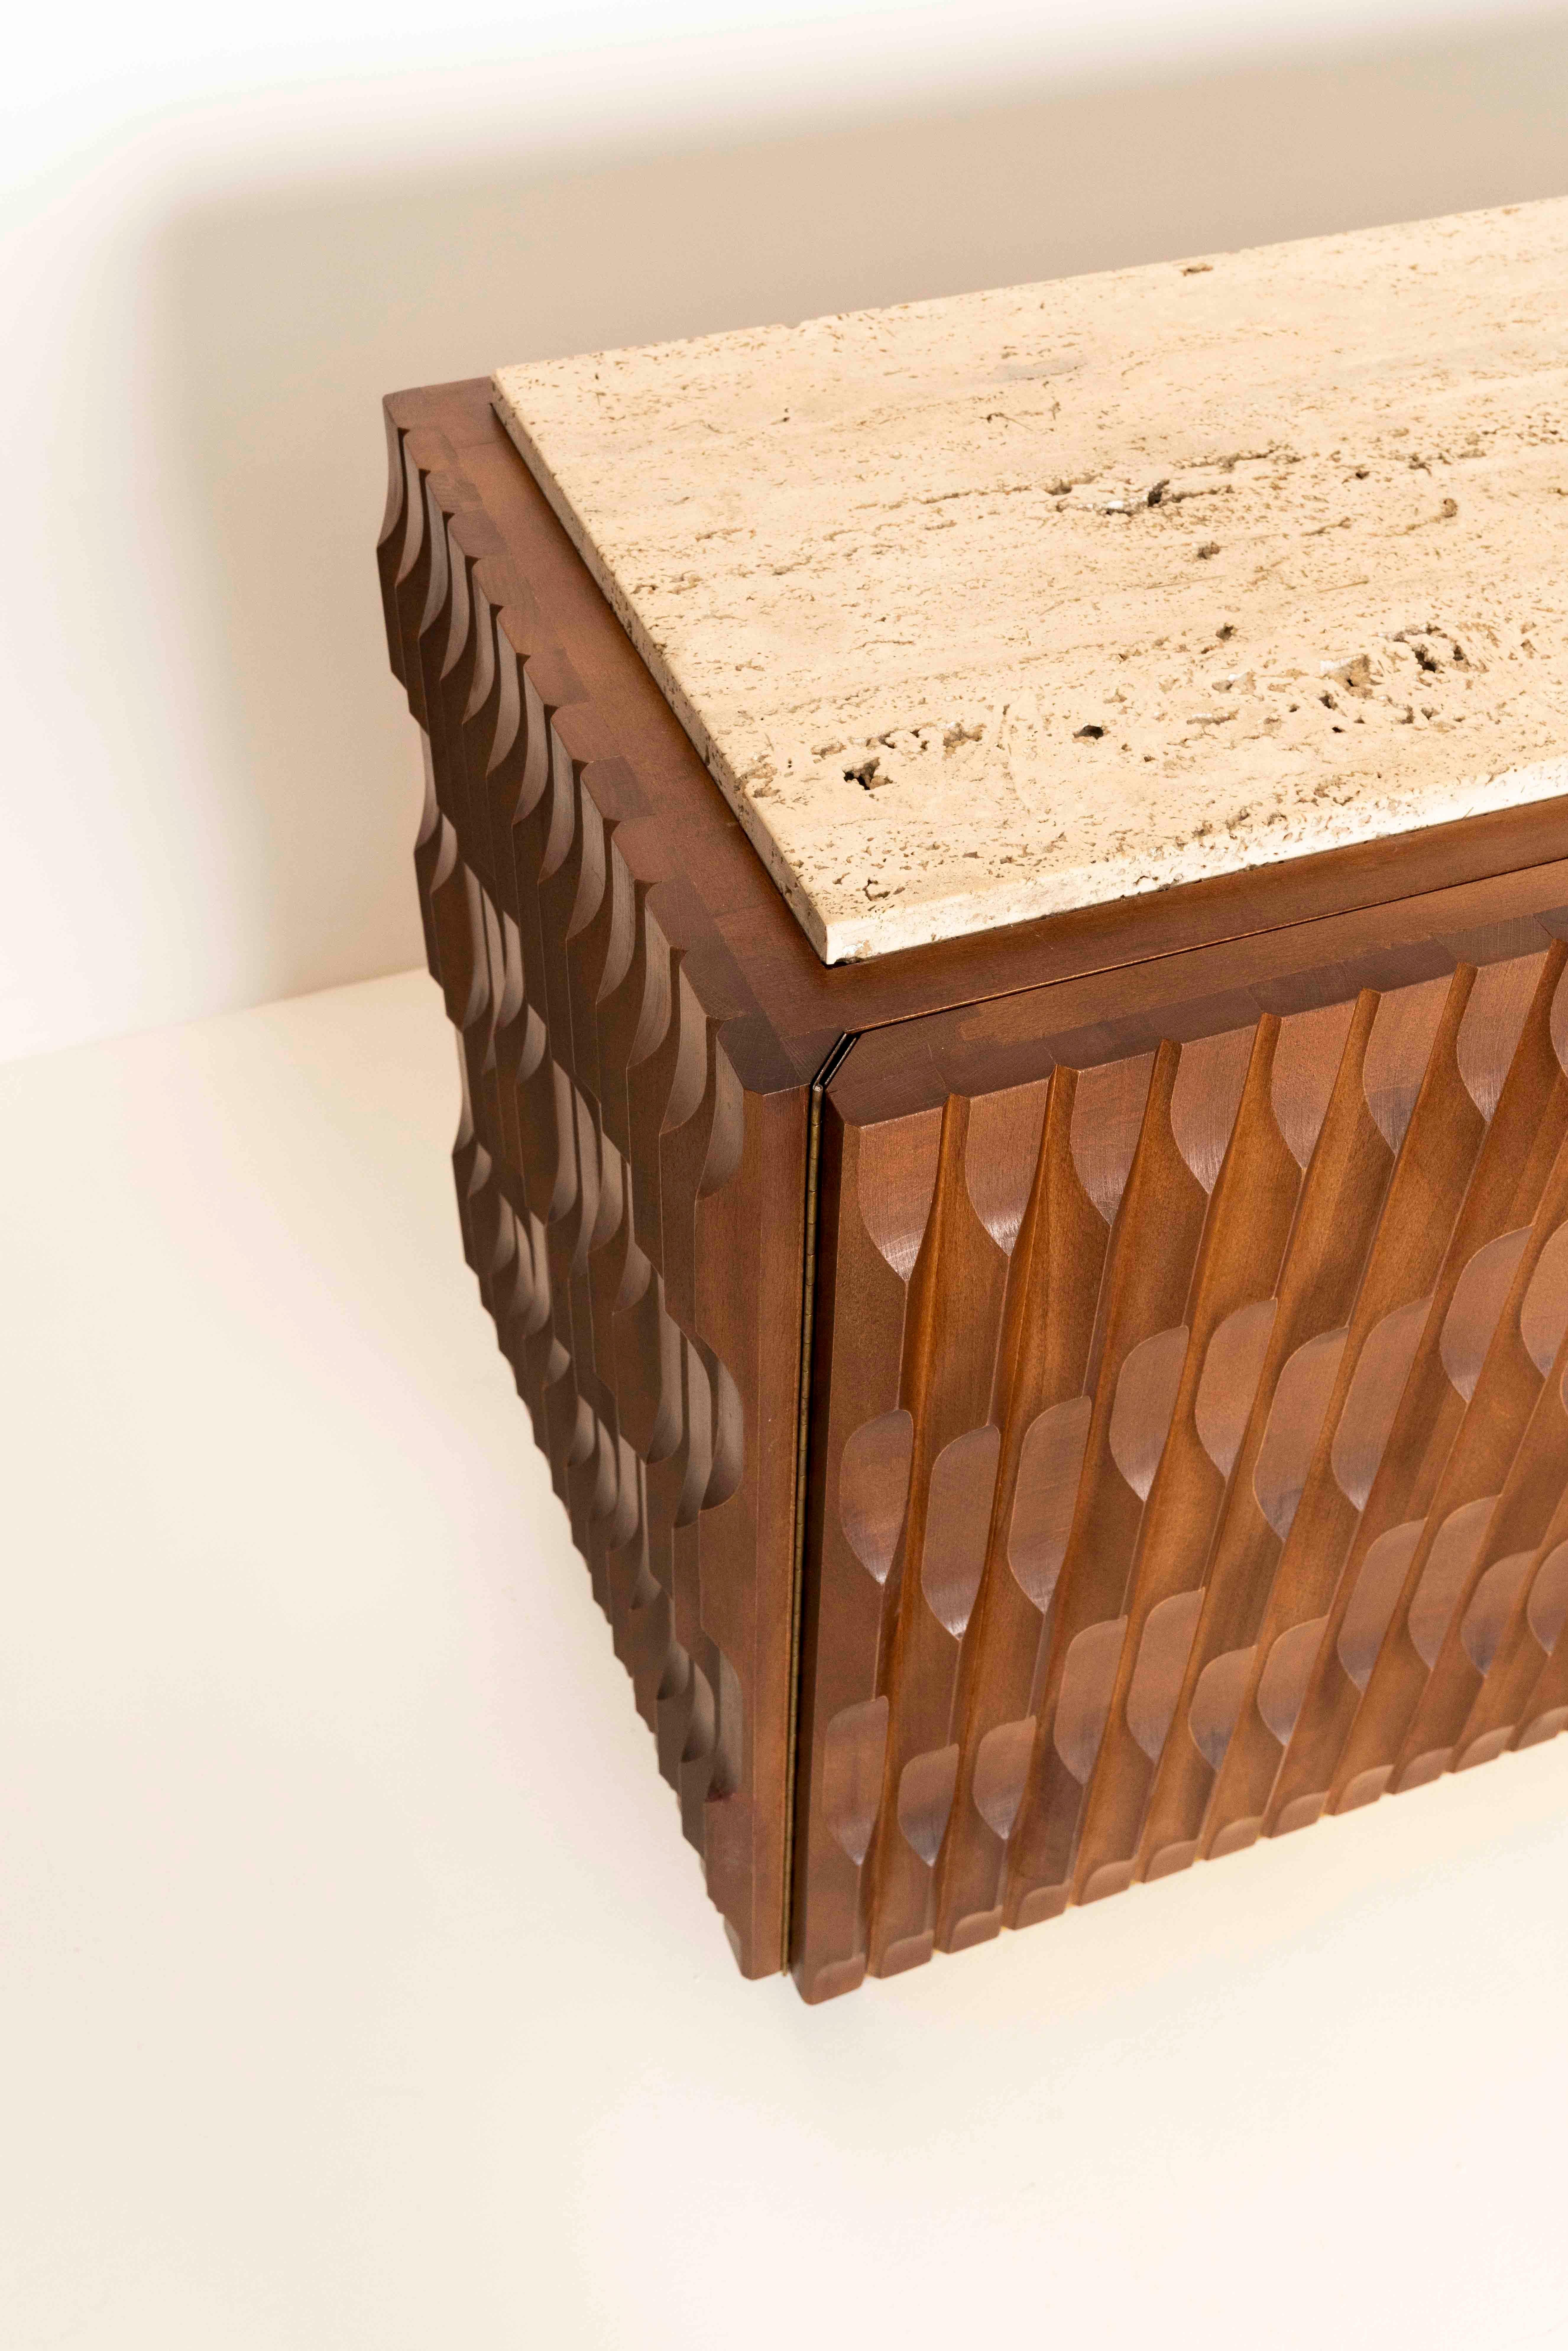 Italian Brutalist Sideboard with Wood, Brass and Travertine, 1970s For Sale 4